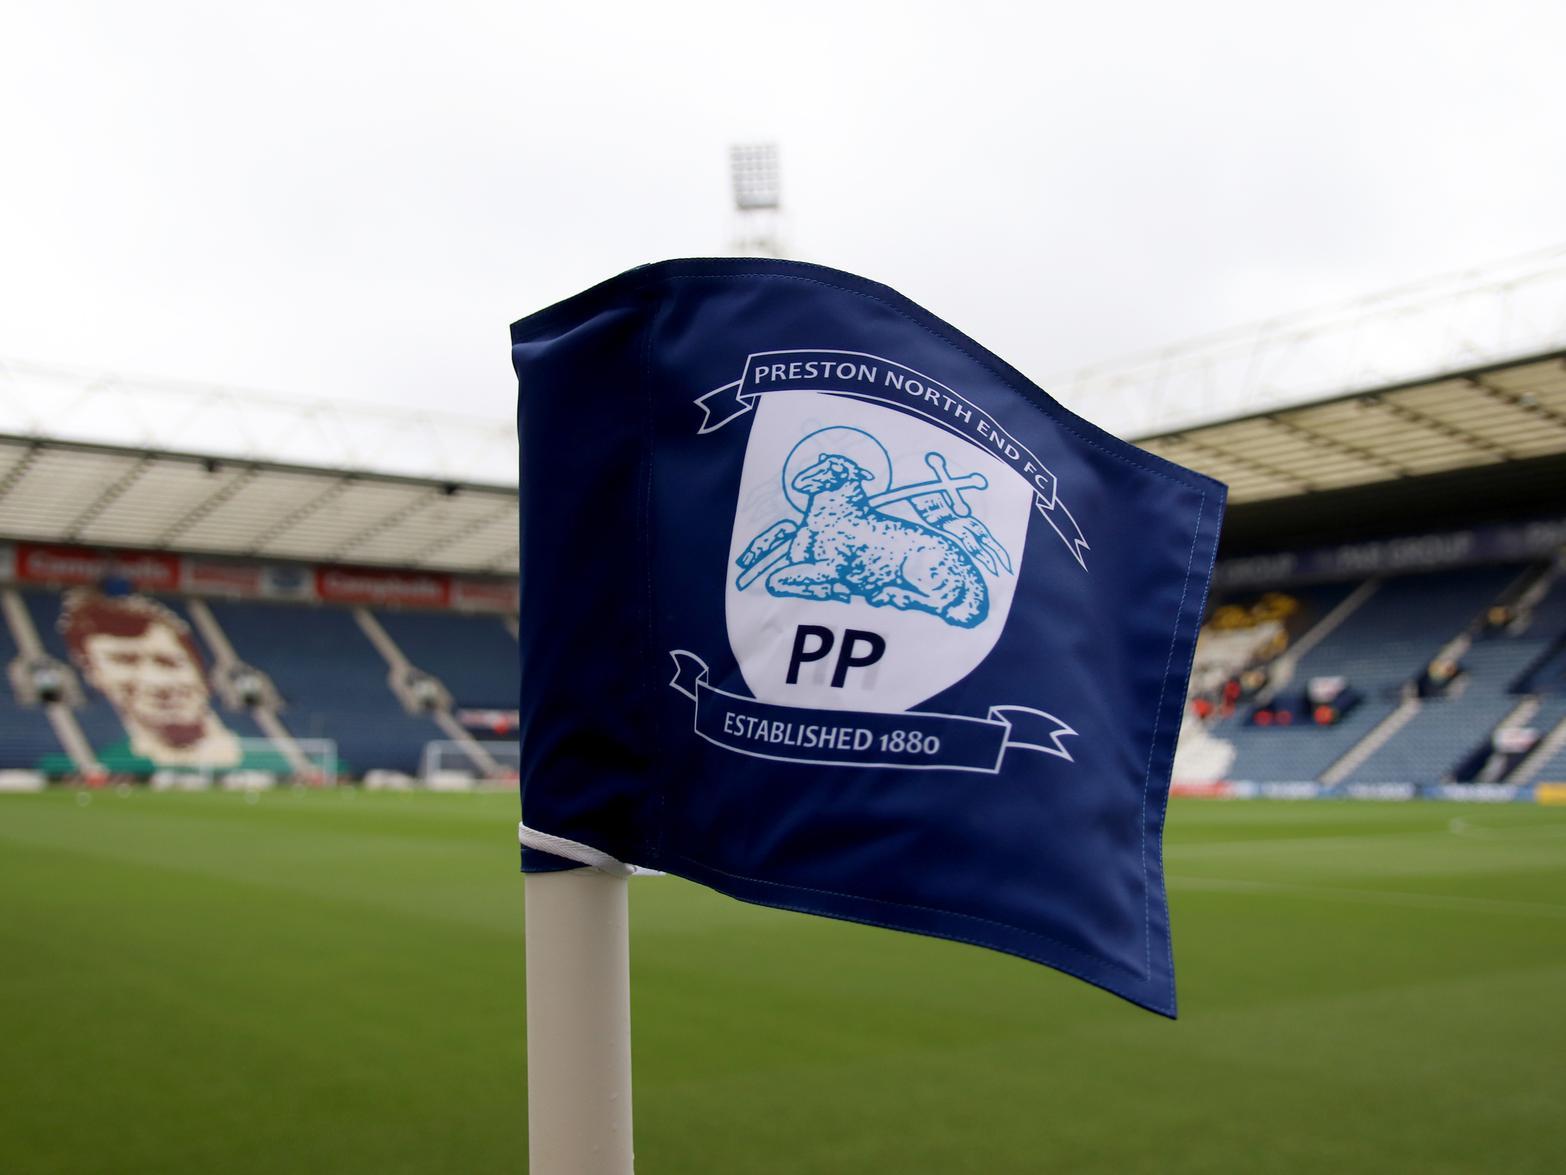 Former Sheffield Wednesday midfielder David Prutton has suggested that he's backing Preston for promotion this season, comparing them favourably to last season's Sheffield United side. (Football League World)